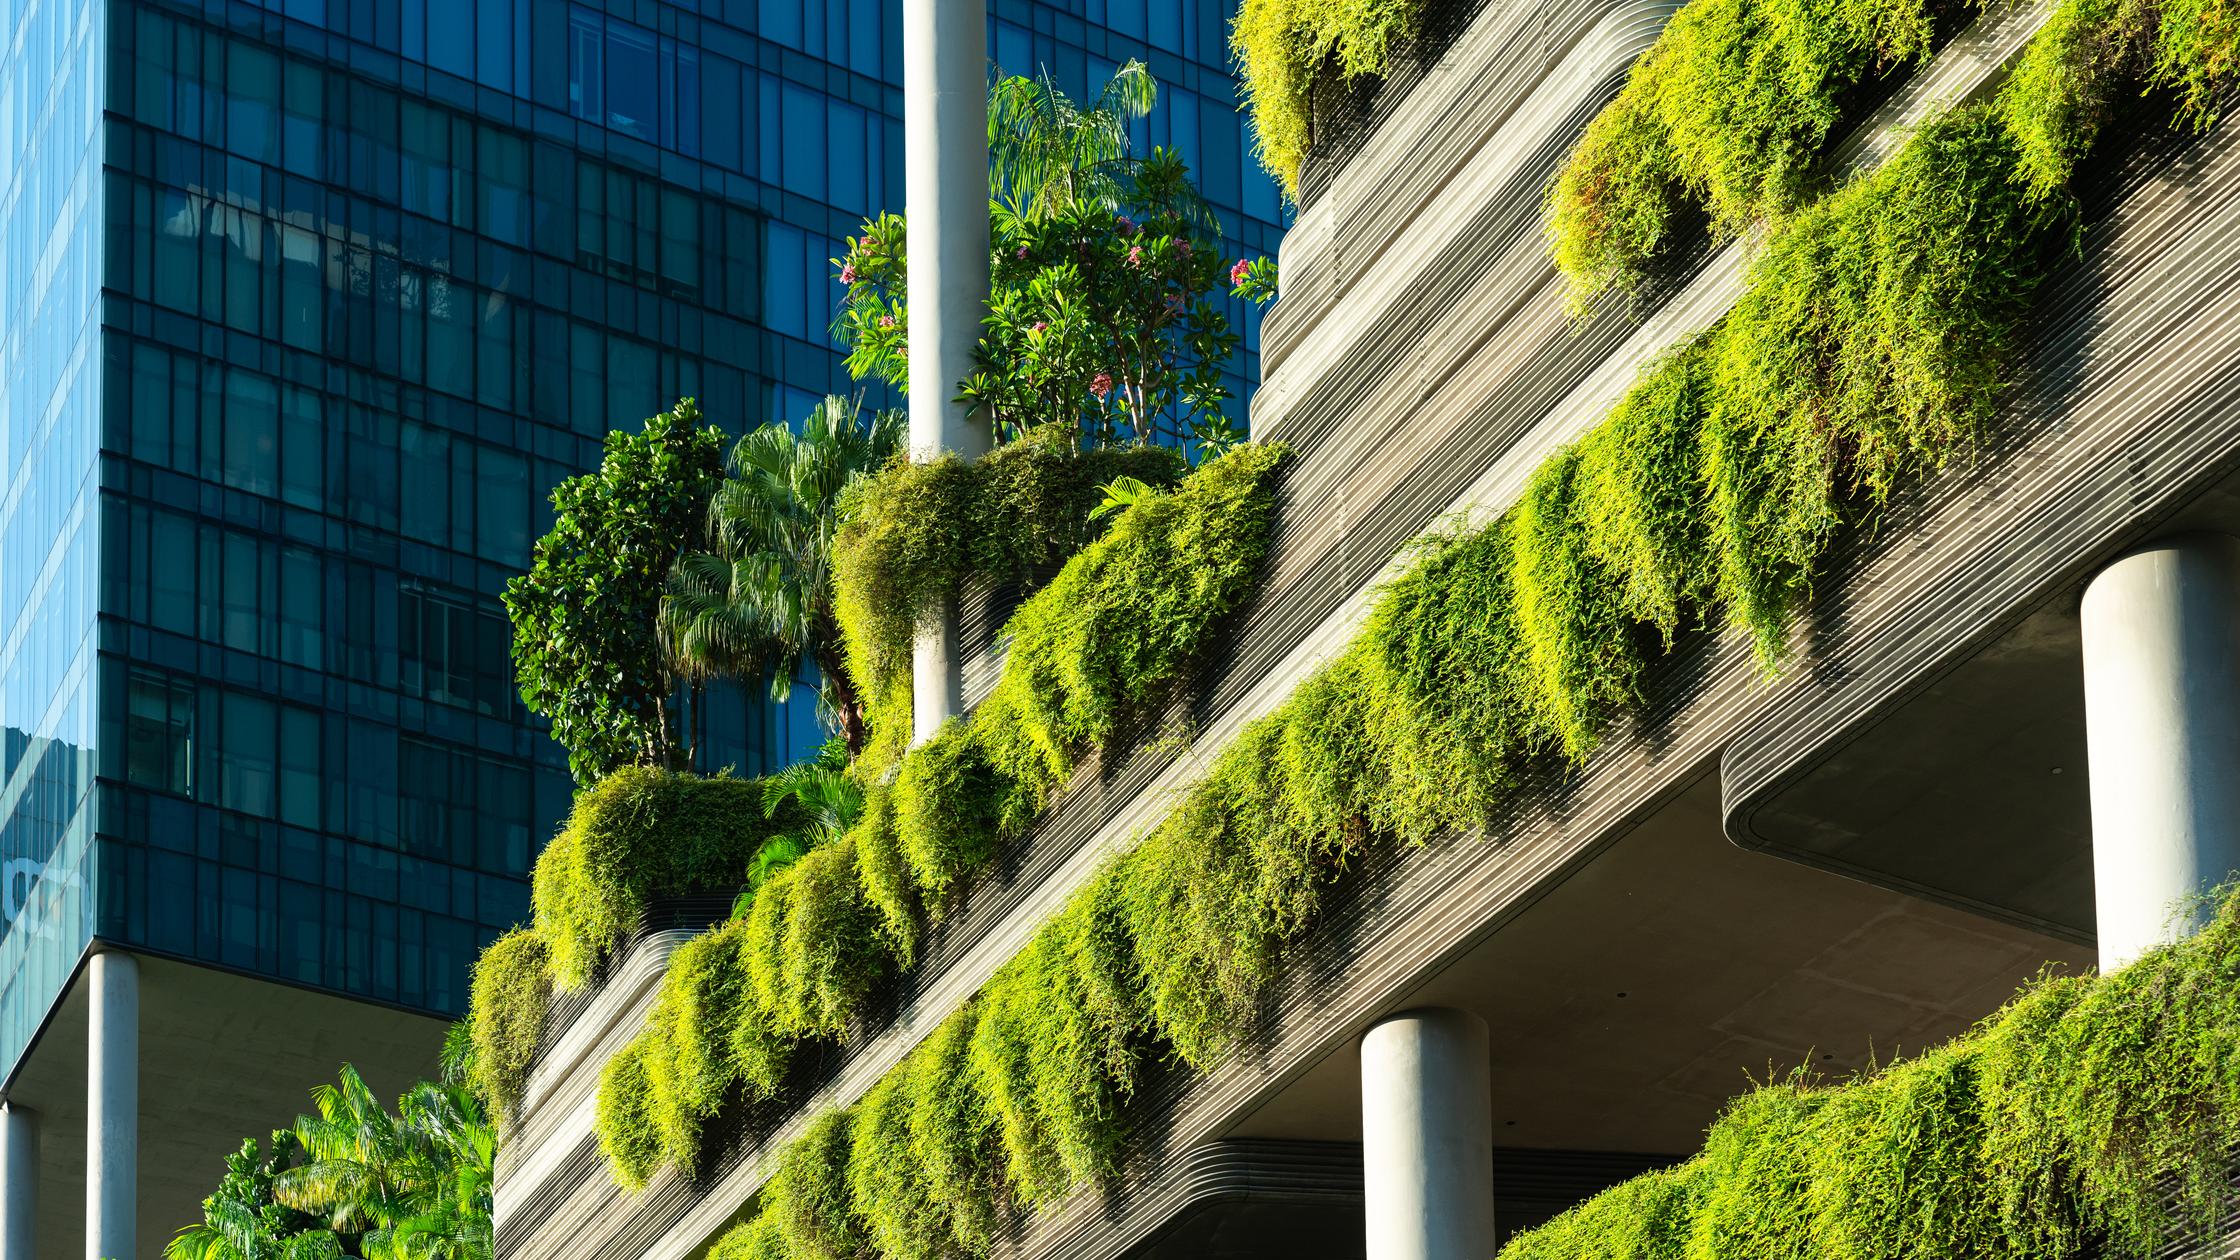 Sustainability in the built environment - greenery on building